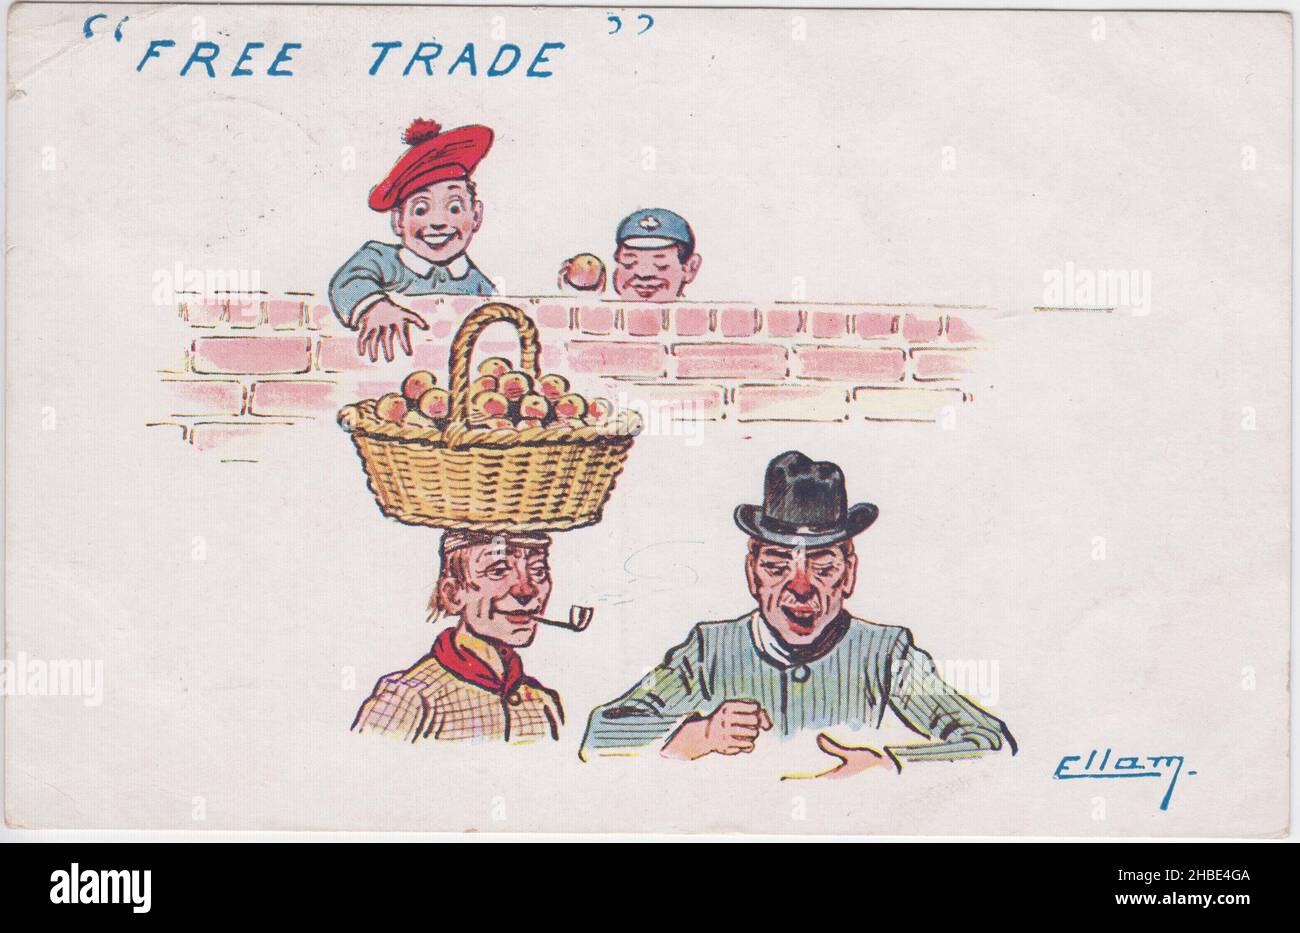 'Free Trade'. Cartoon showing two boys stealing apples from a basket on a rural labourer's head, whilst hiding behind a wall. The labourer is smoking a clay pipe & listening to a speech (or rant) by his friend. The postcard by William Henry Ellam (1858–1935) is one of a series in which he satirises the debate over free trade versus protectionism / tariff reform in the first decade of the 20th century Stock Photo